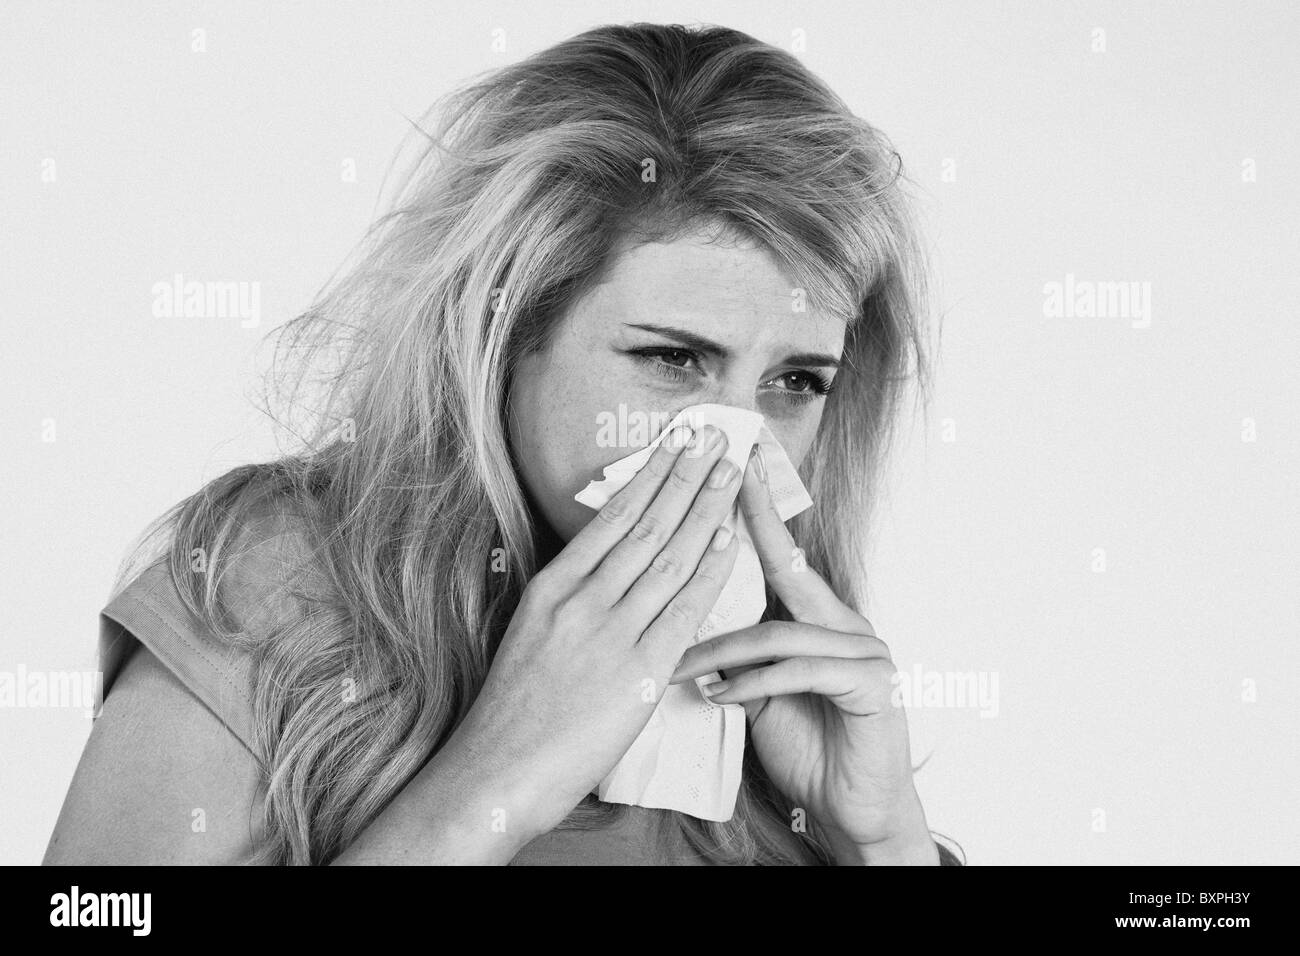 Young blond woman with a cold sneezing and blowing her nose on a tissue Stock Photo